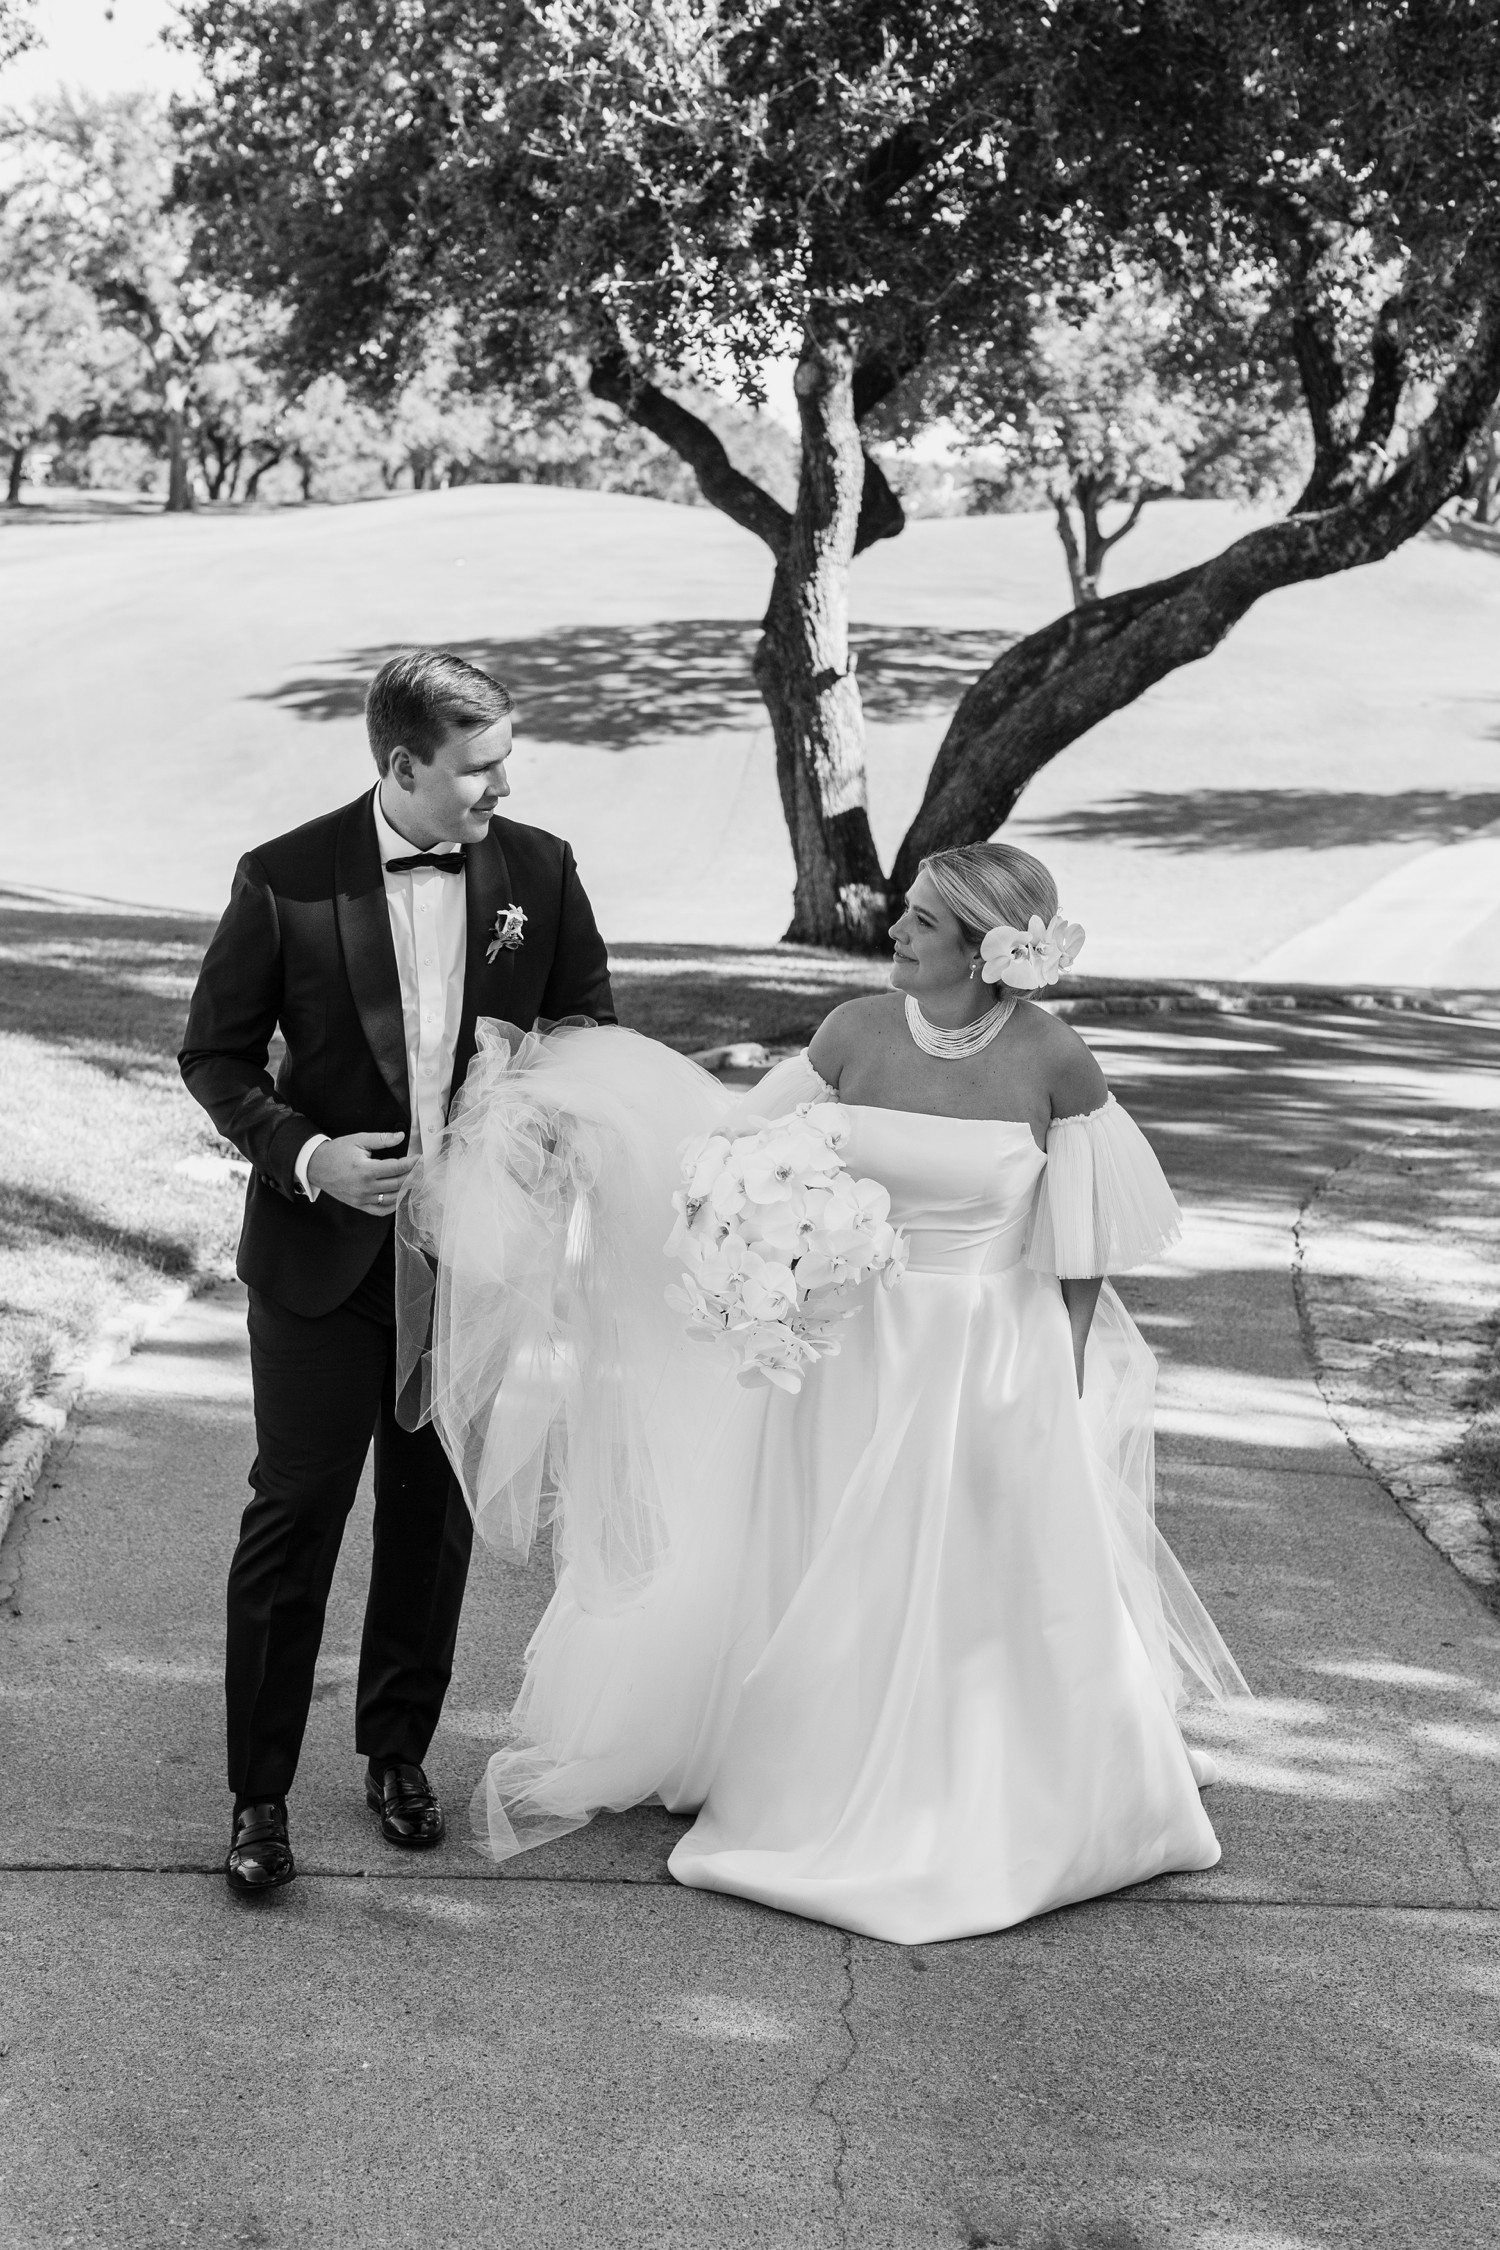 Groom holding bride's dress as they walk together at Austin Country Club.